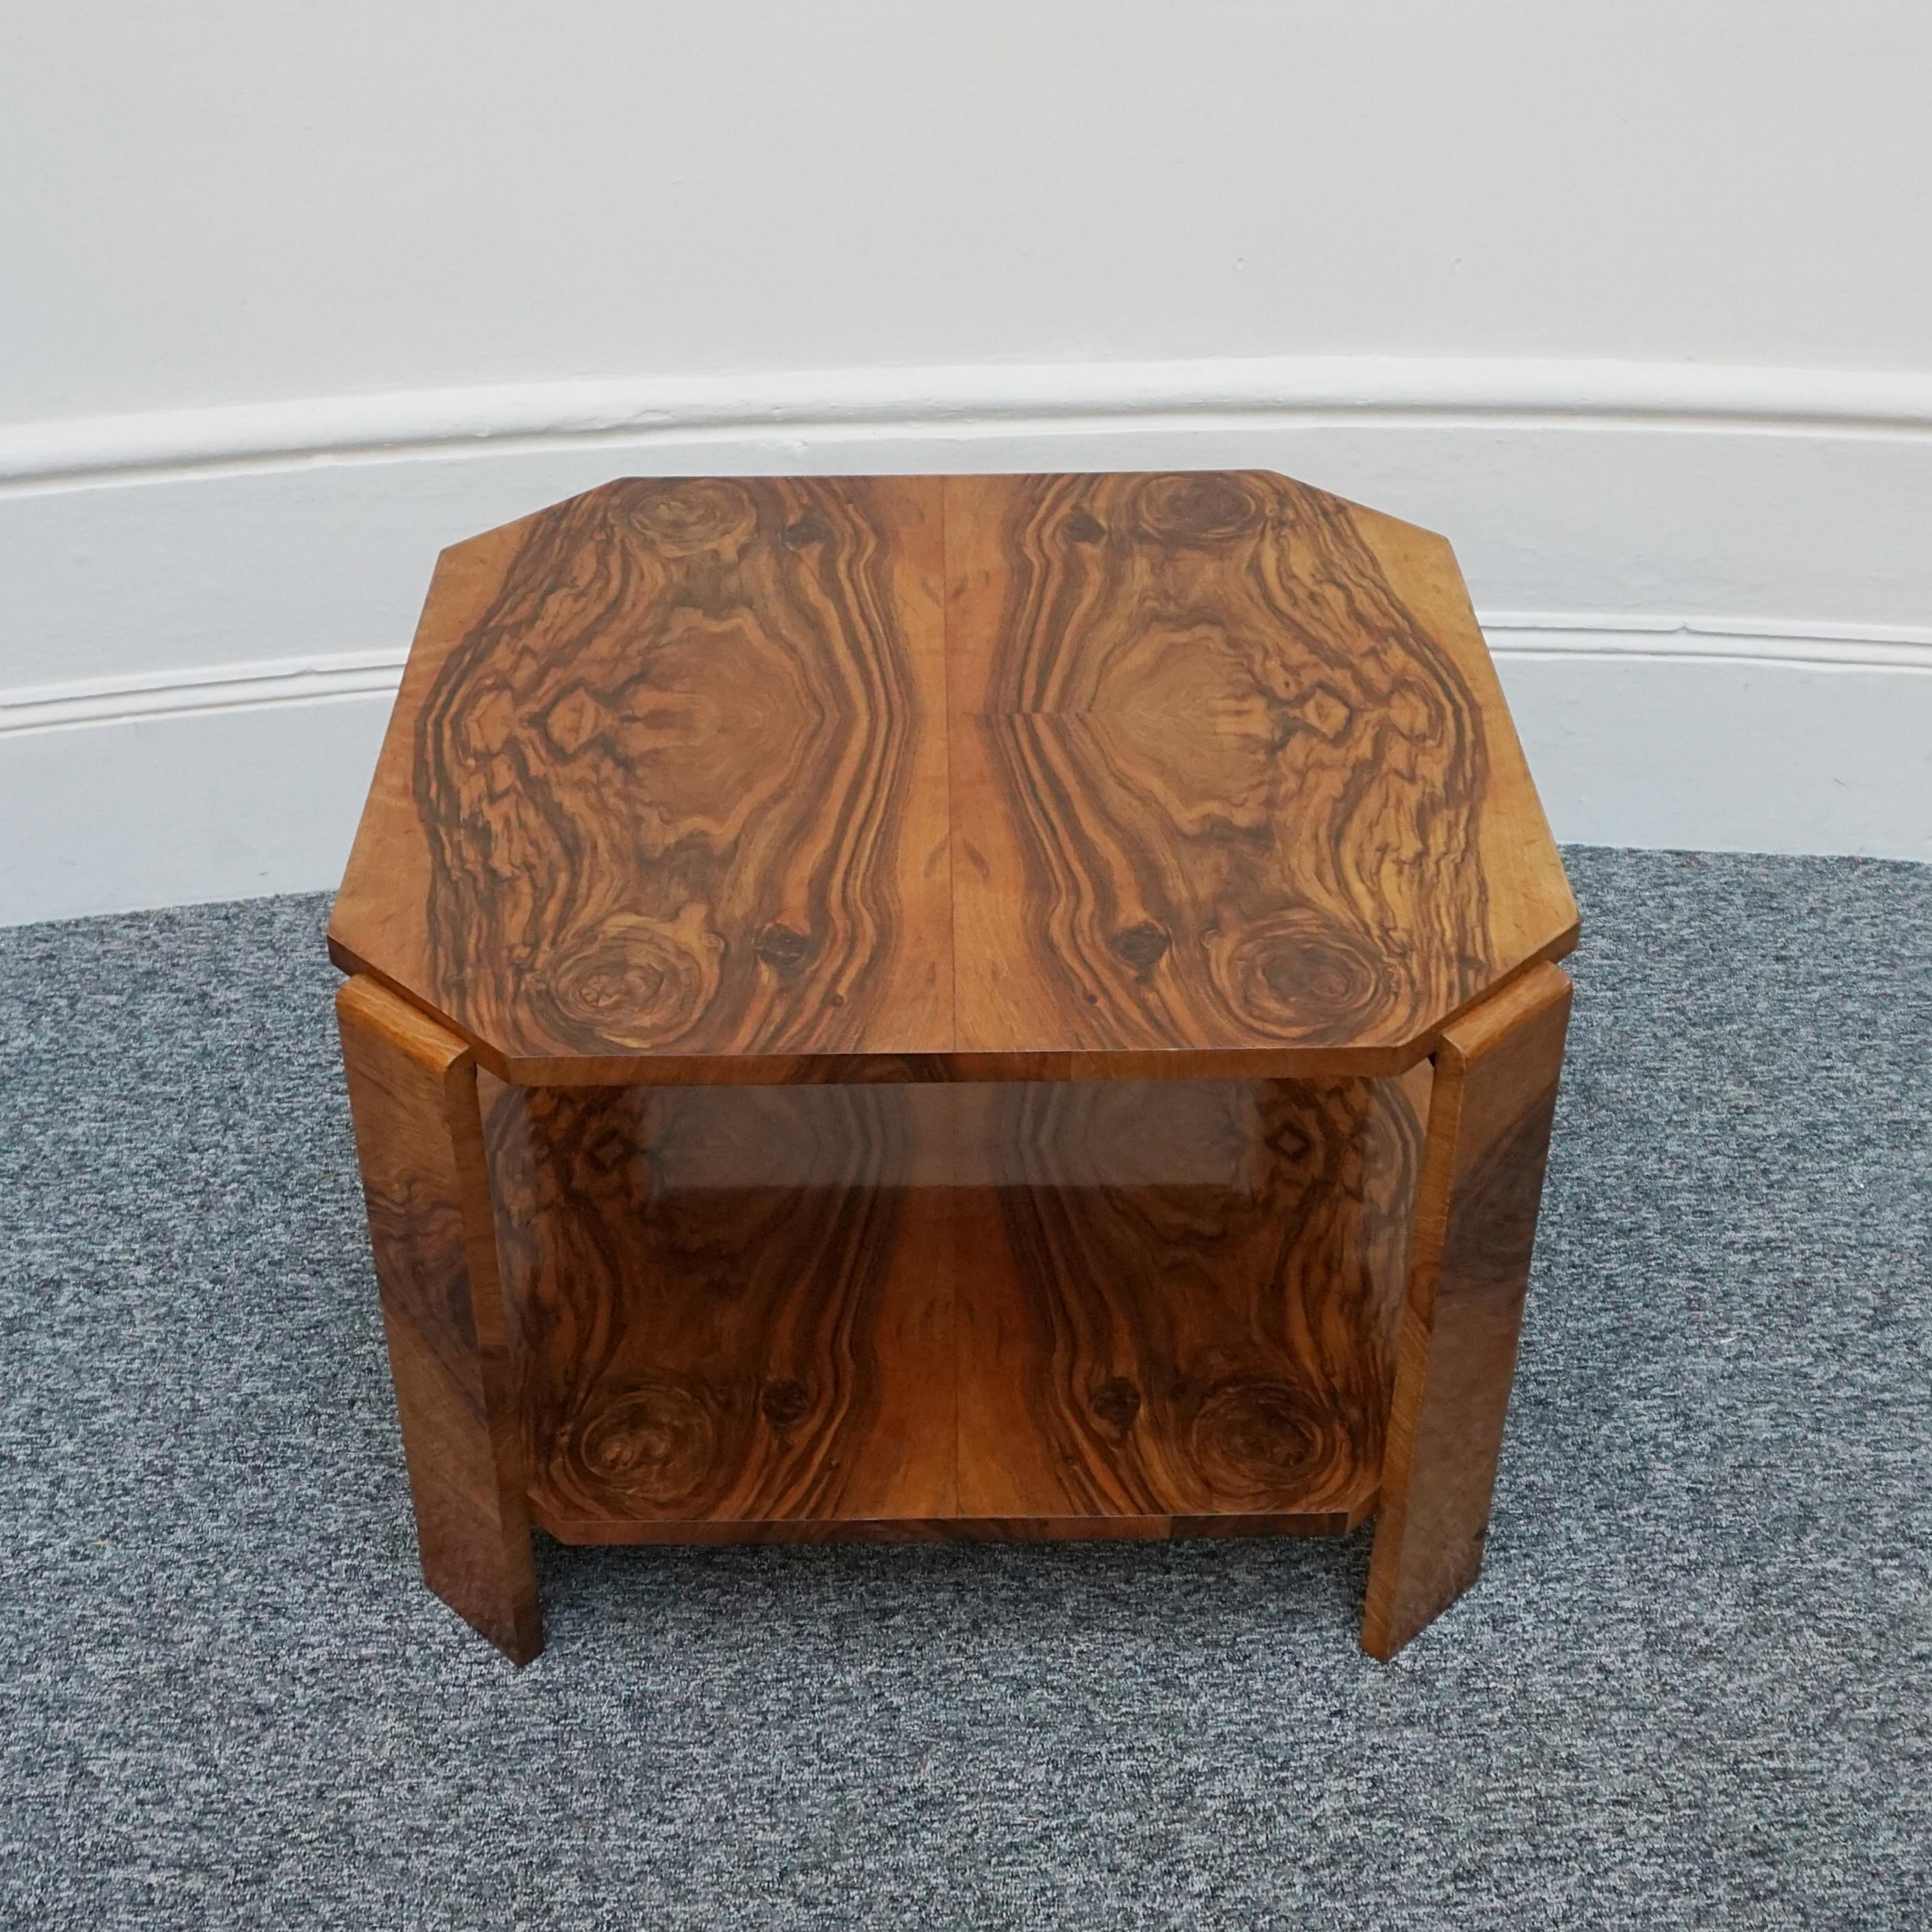 An Art Deco two-tiered side table. Burr walnut veneered on mahogany. 

Dimensions: H 48cm W 68.5cm D 68.5cm 

Origin: English

Date: Circa 1935 

Item Number: 2311234

All of our furniture is extensively polished and restored where necessary to the